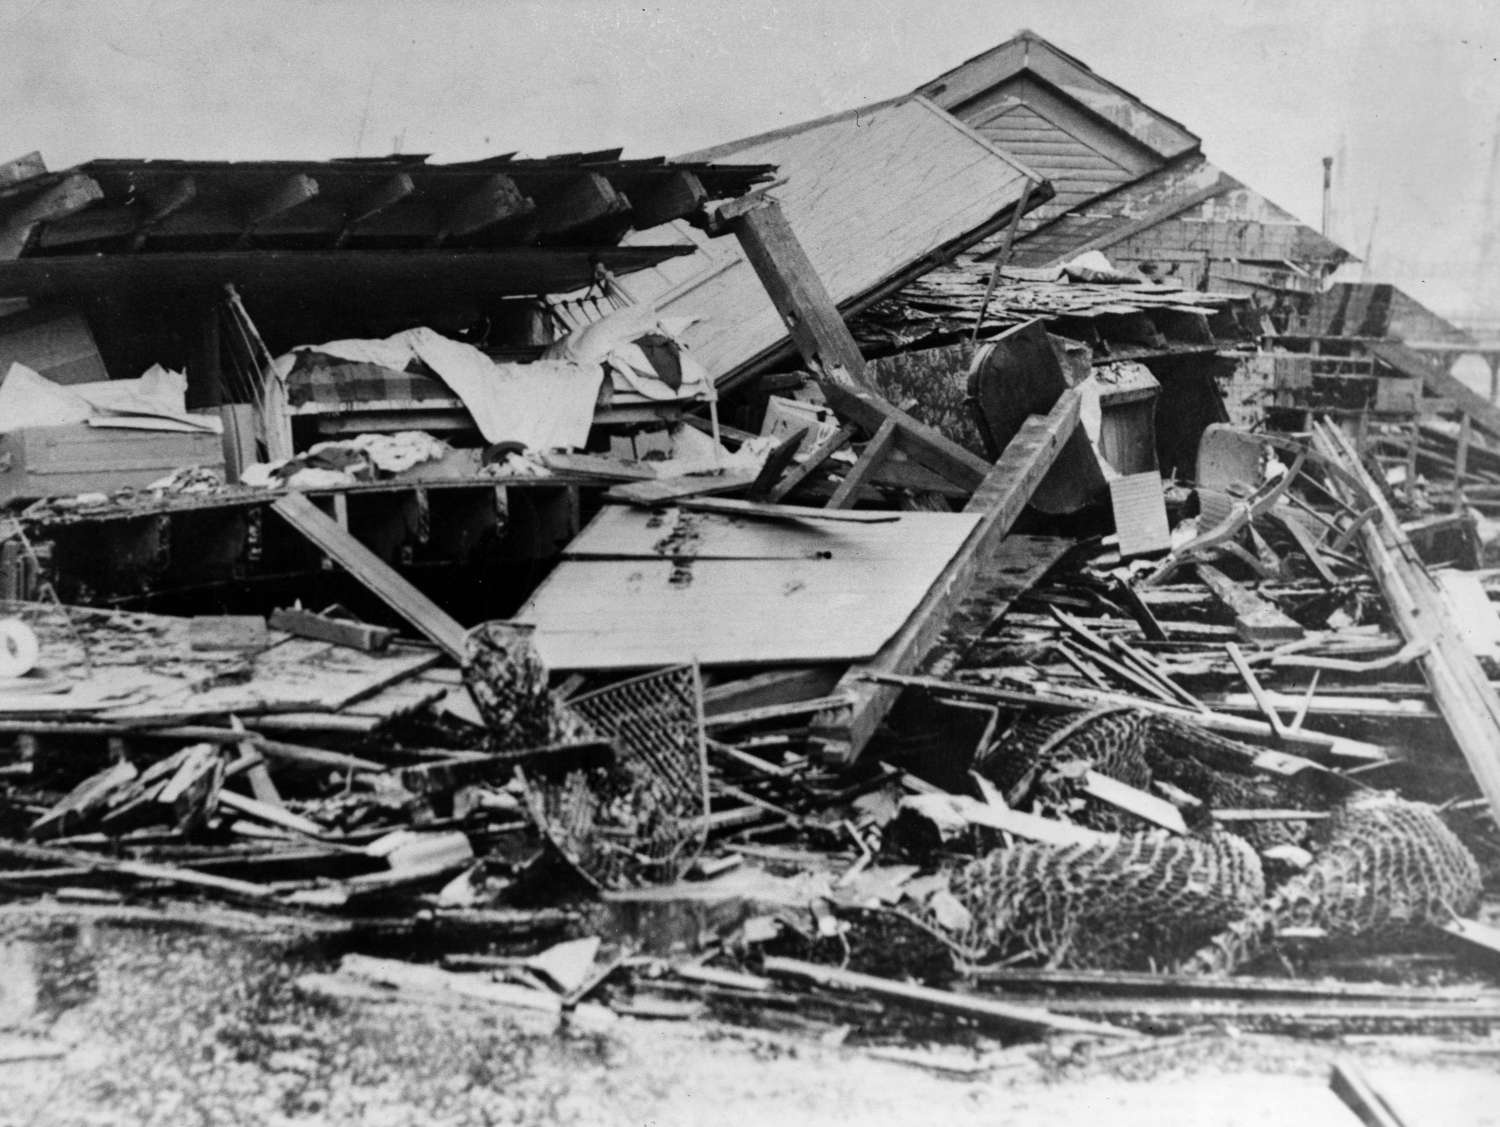 Destruction from the Great Molasses Flood of 1919